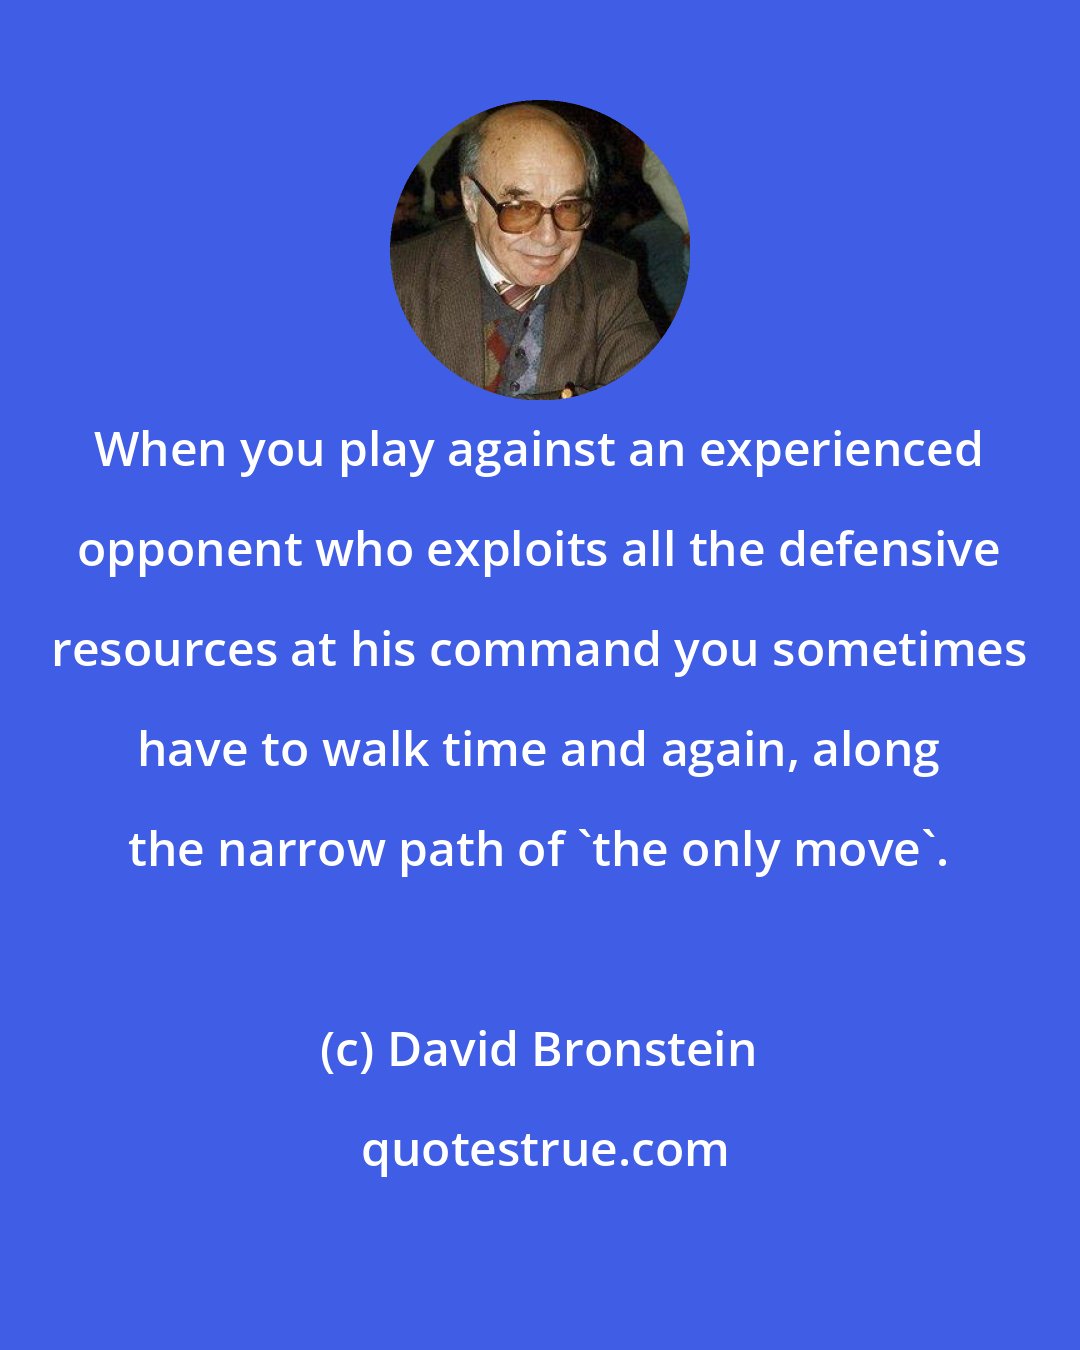 David Bronstein: When you play against an experienced opponent who exploits all the defensive resources at his command you sometimes have to walk time and again, along the narrow path of 'the only move'.